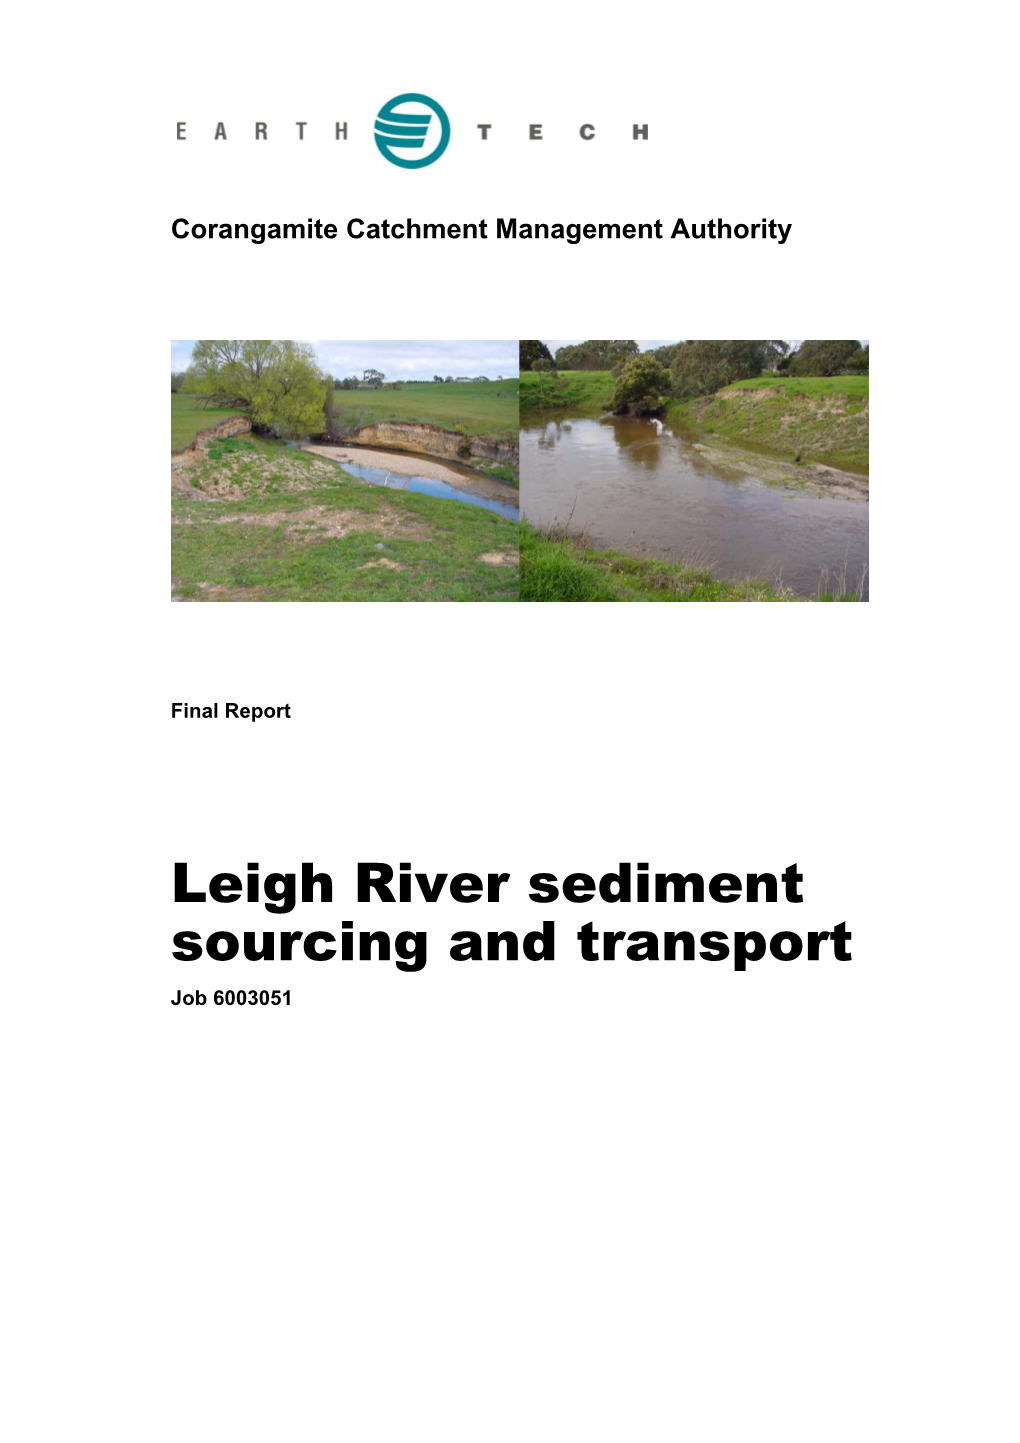 Leigh River Sediment Sourcing and Transport Job 6003051